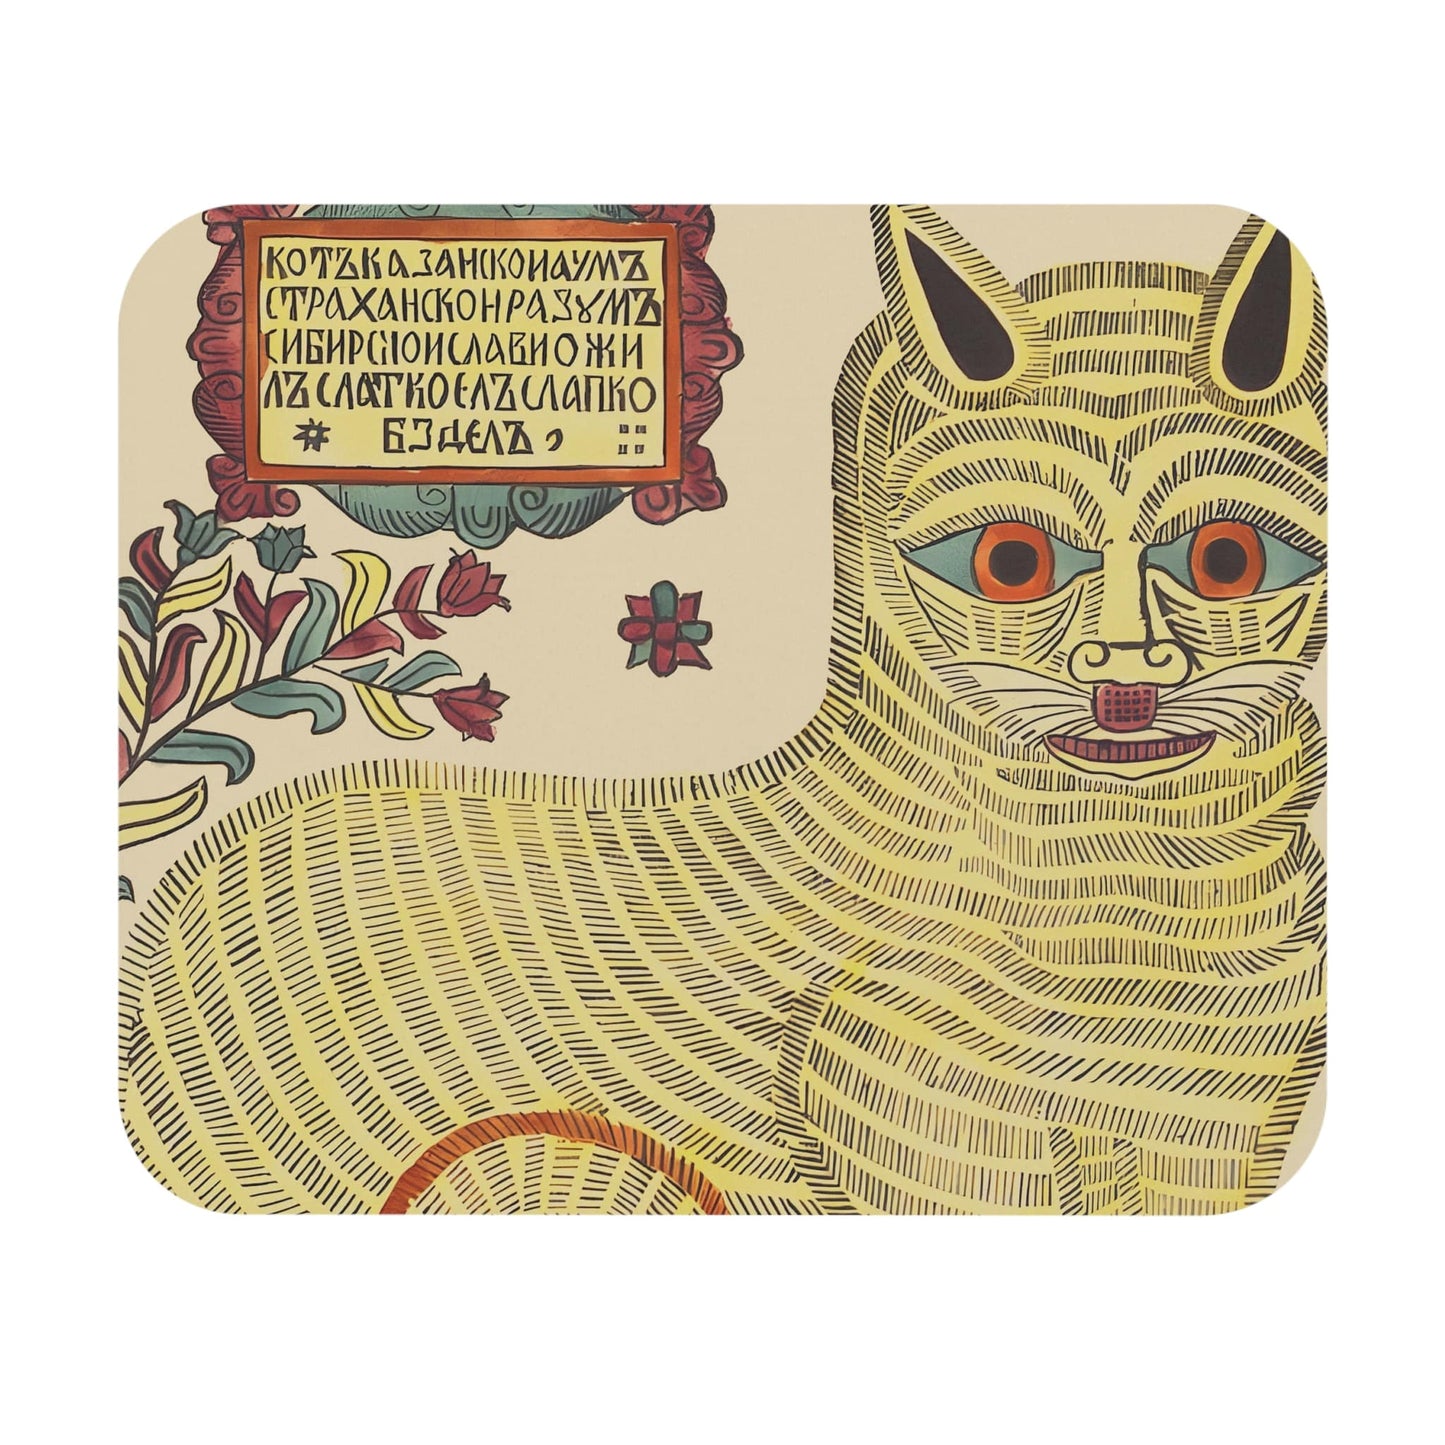 Cat Drawing Mouse Pad with funny crazy cat art, desk and office decor featuring humorous cat illustrations.